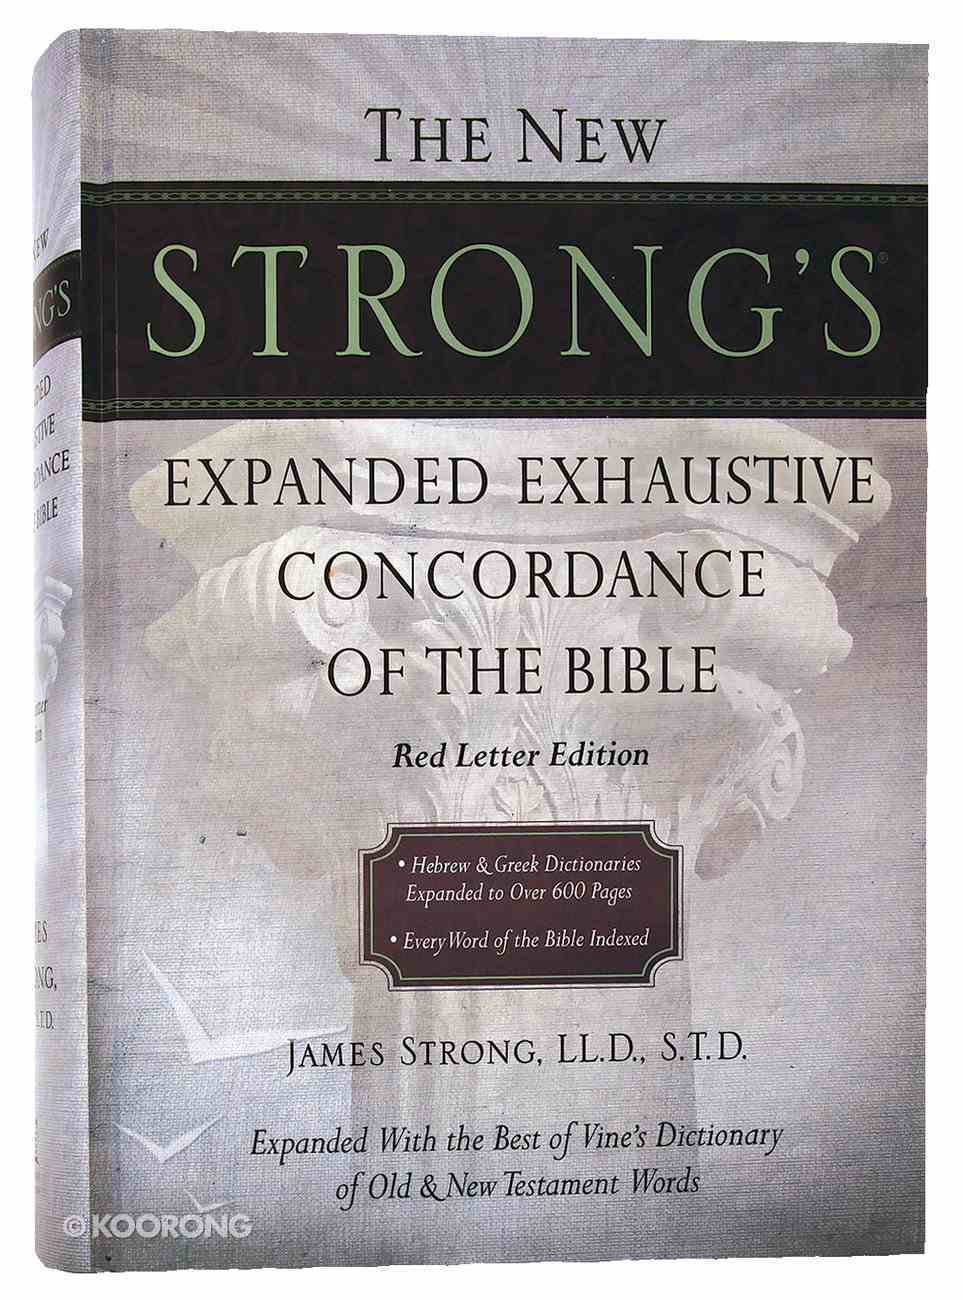 New Strong's Expanded Exhaustive Concordance of the Bible (Kjv Based) Hardback